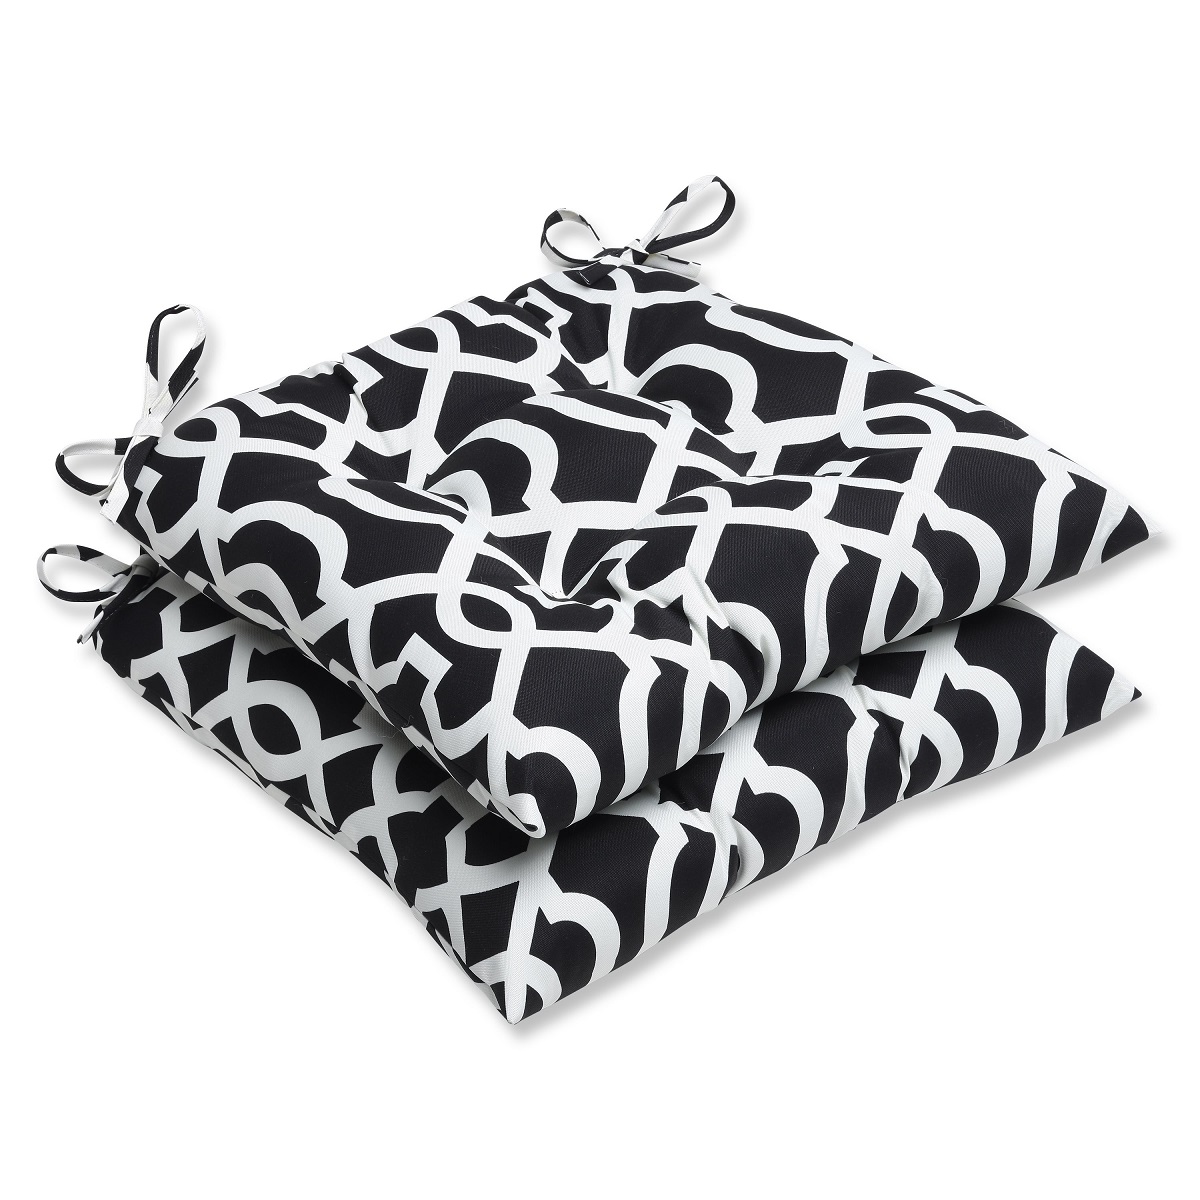 Pillow Perfect Set of 2 Black and White Outdoor Tufted Patio Chair Cushions 19"